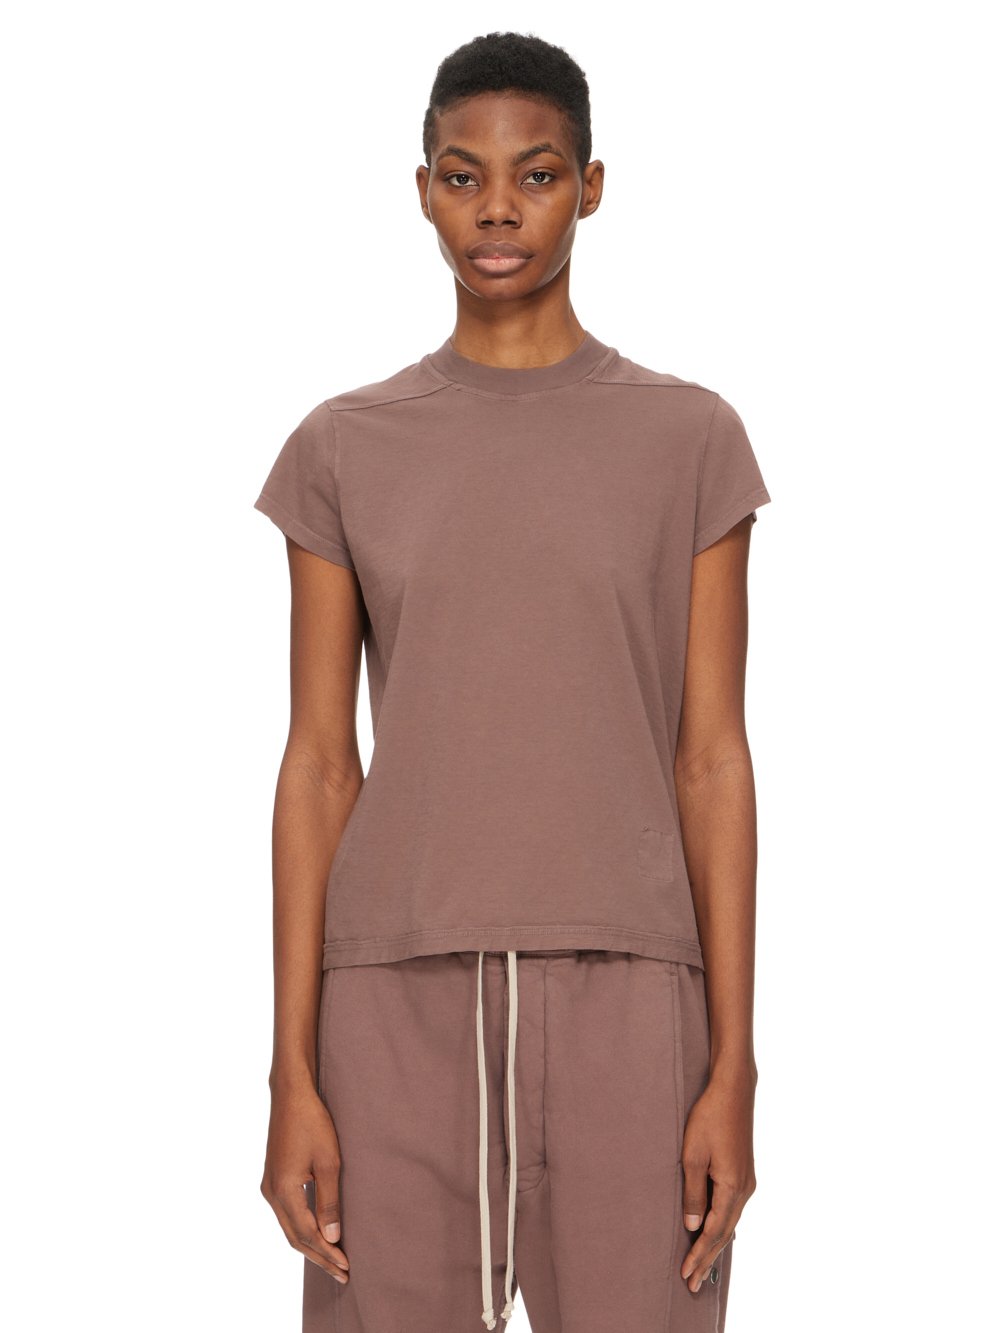 RICK OWENS FW23 LUXOR SMALL LEVEL T IN MAUVE MEDIUM WEIGHT COTTON JERSEY 